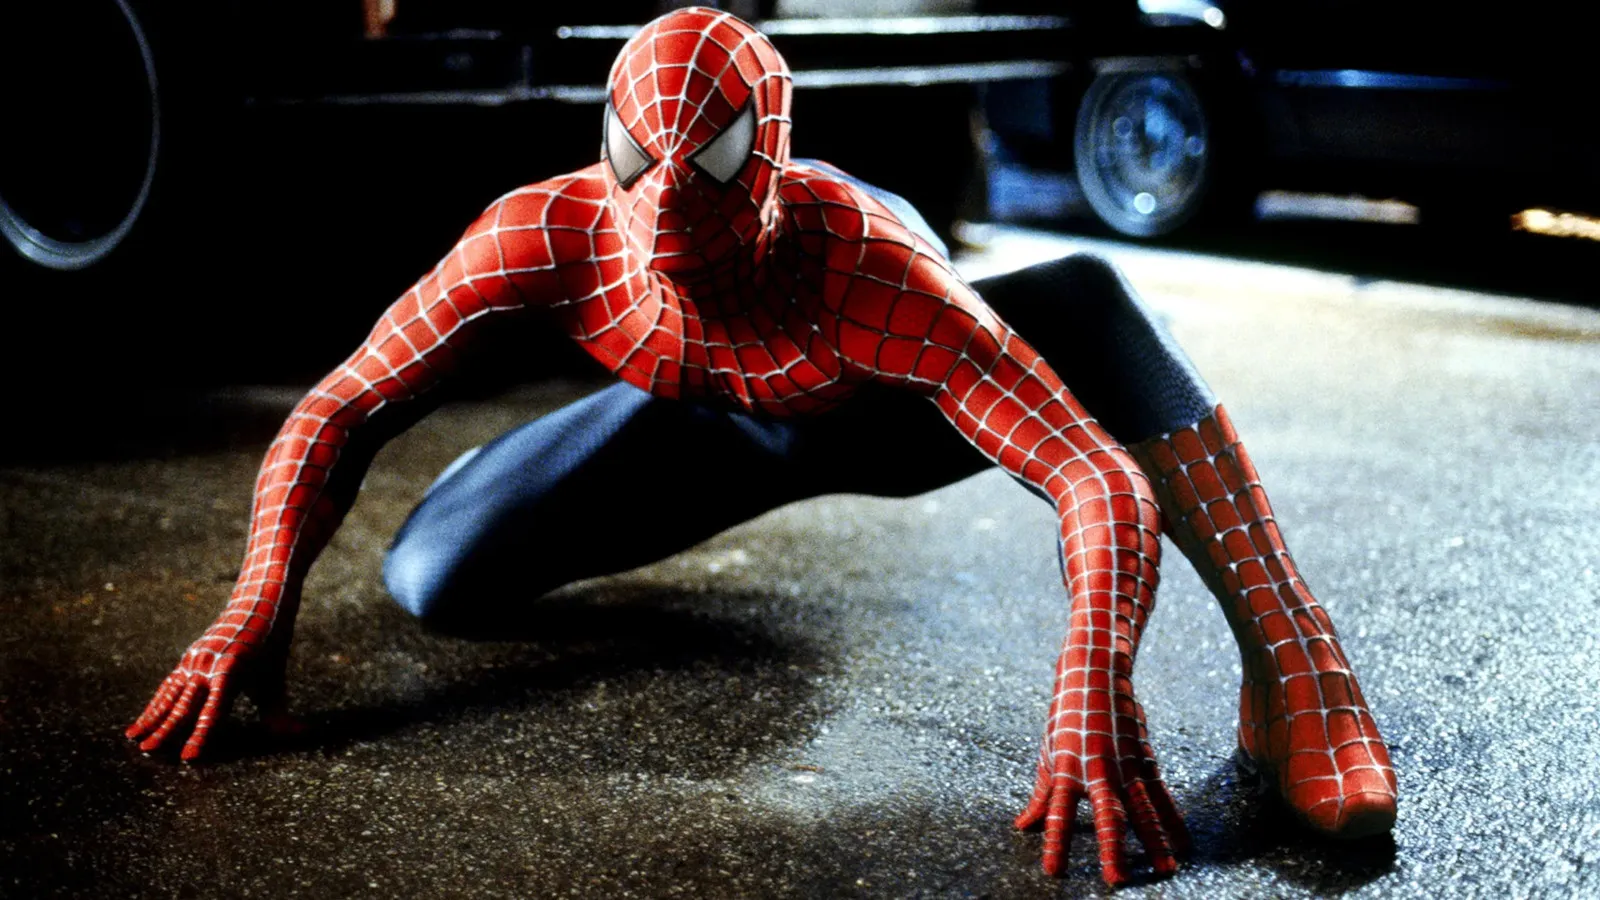 Andrew Garfield Reflects on Abandoning Amazing Spider-Man 3